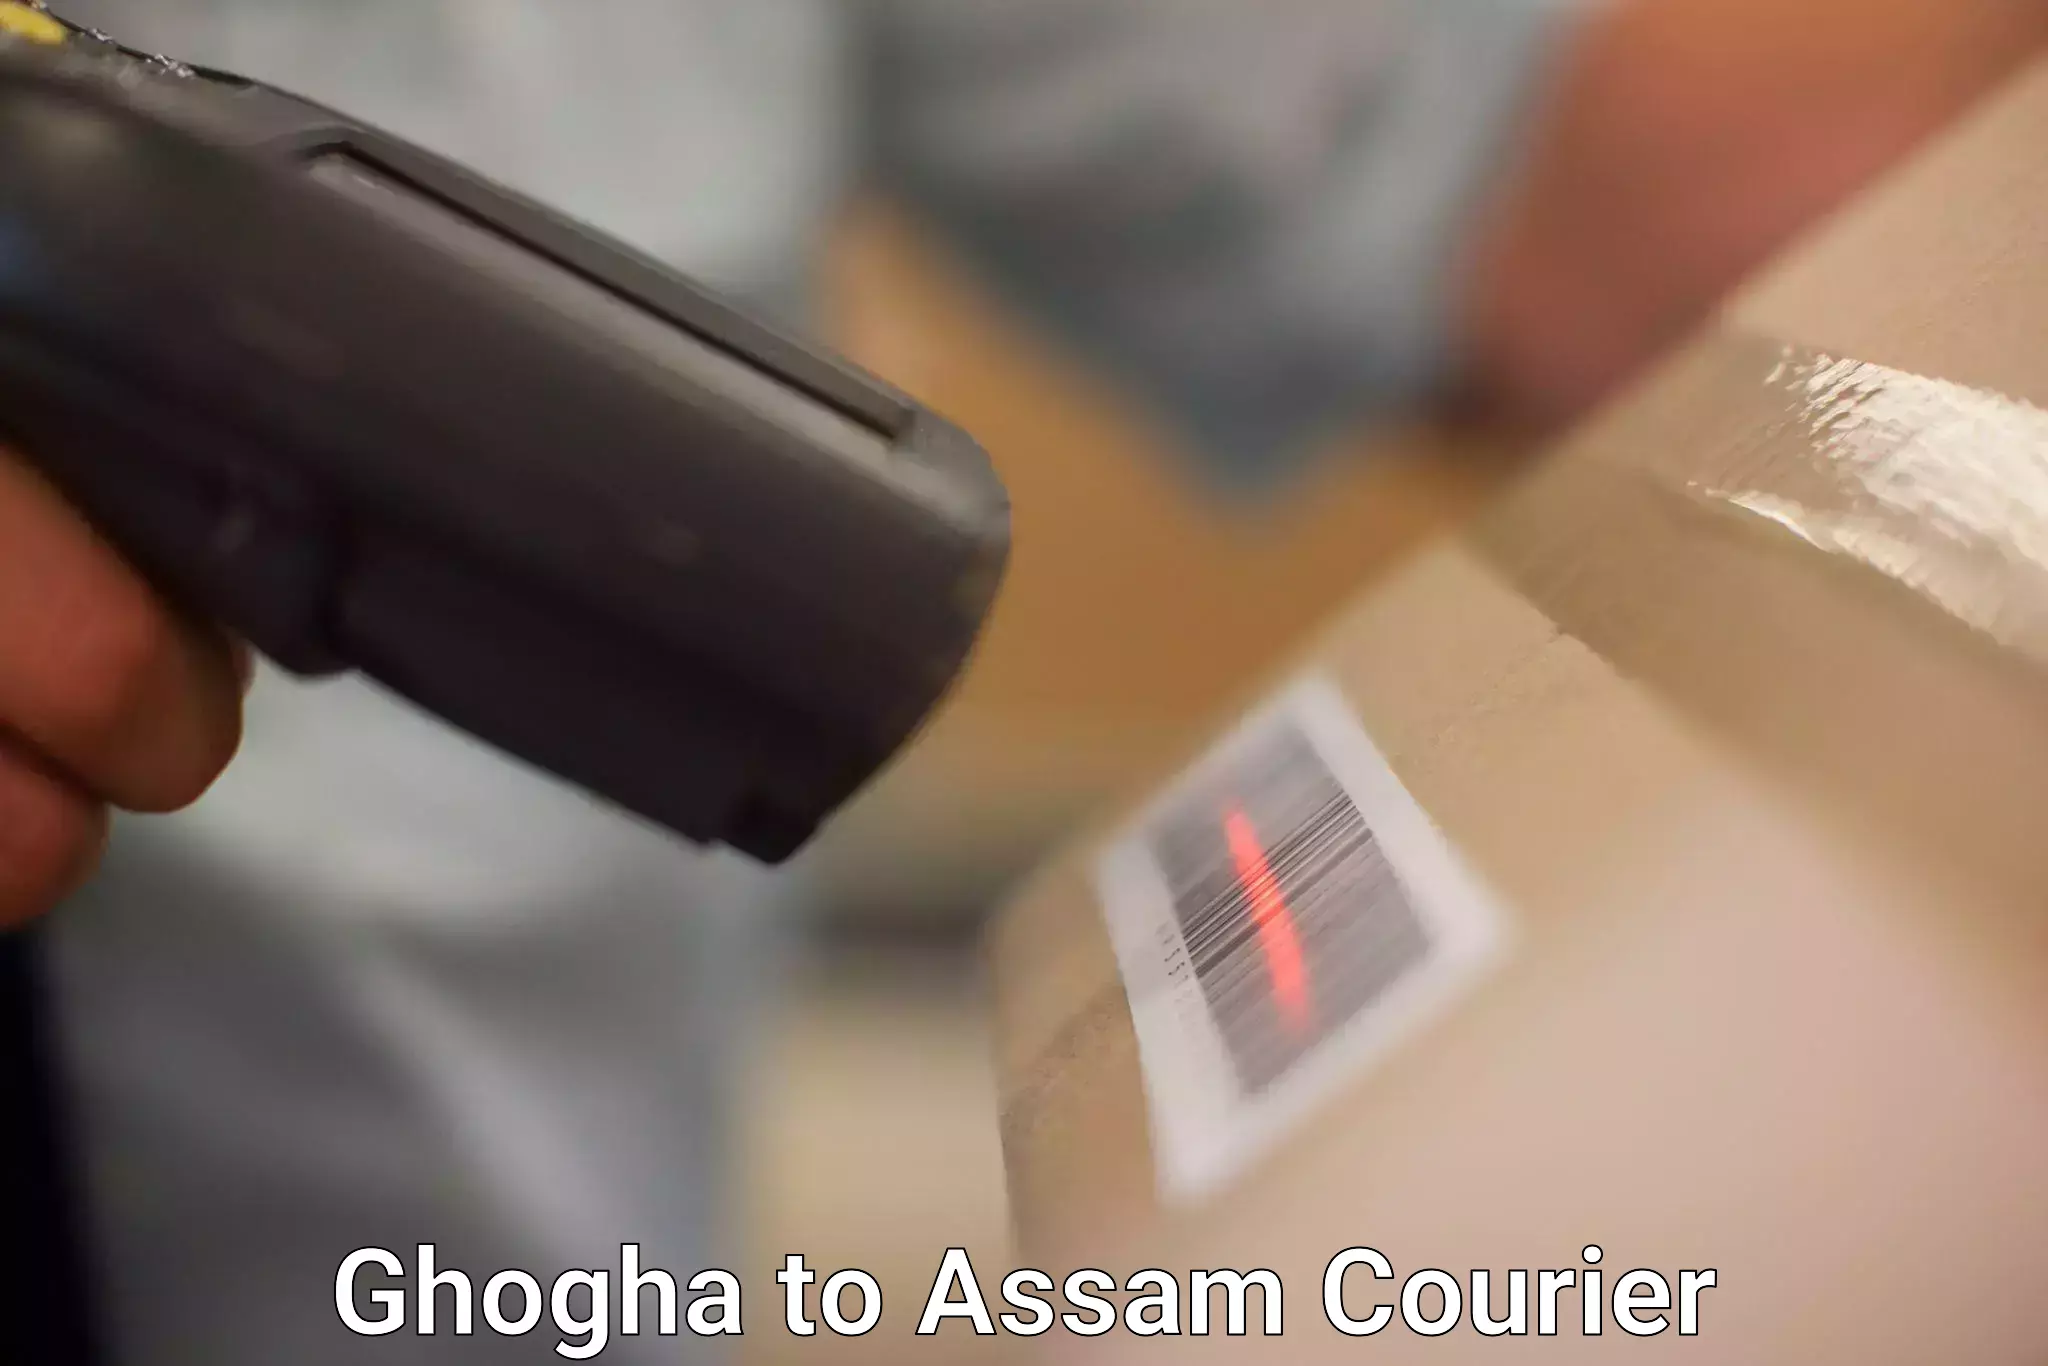 Courier service booking Ghogha to Assam